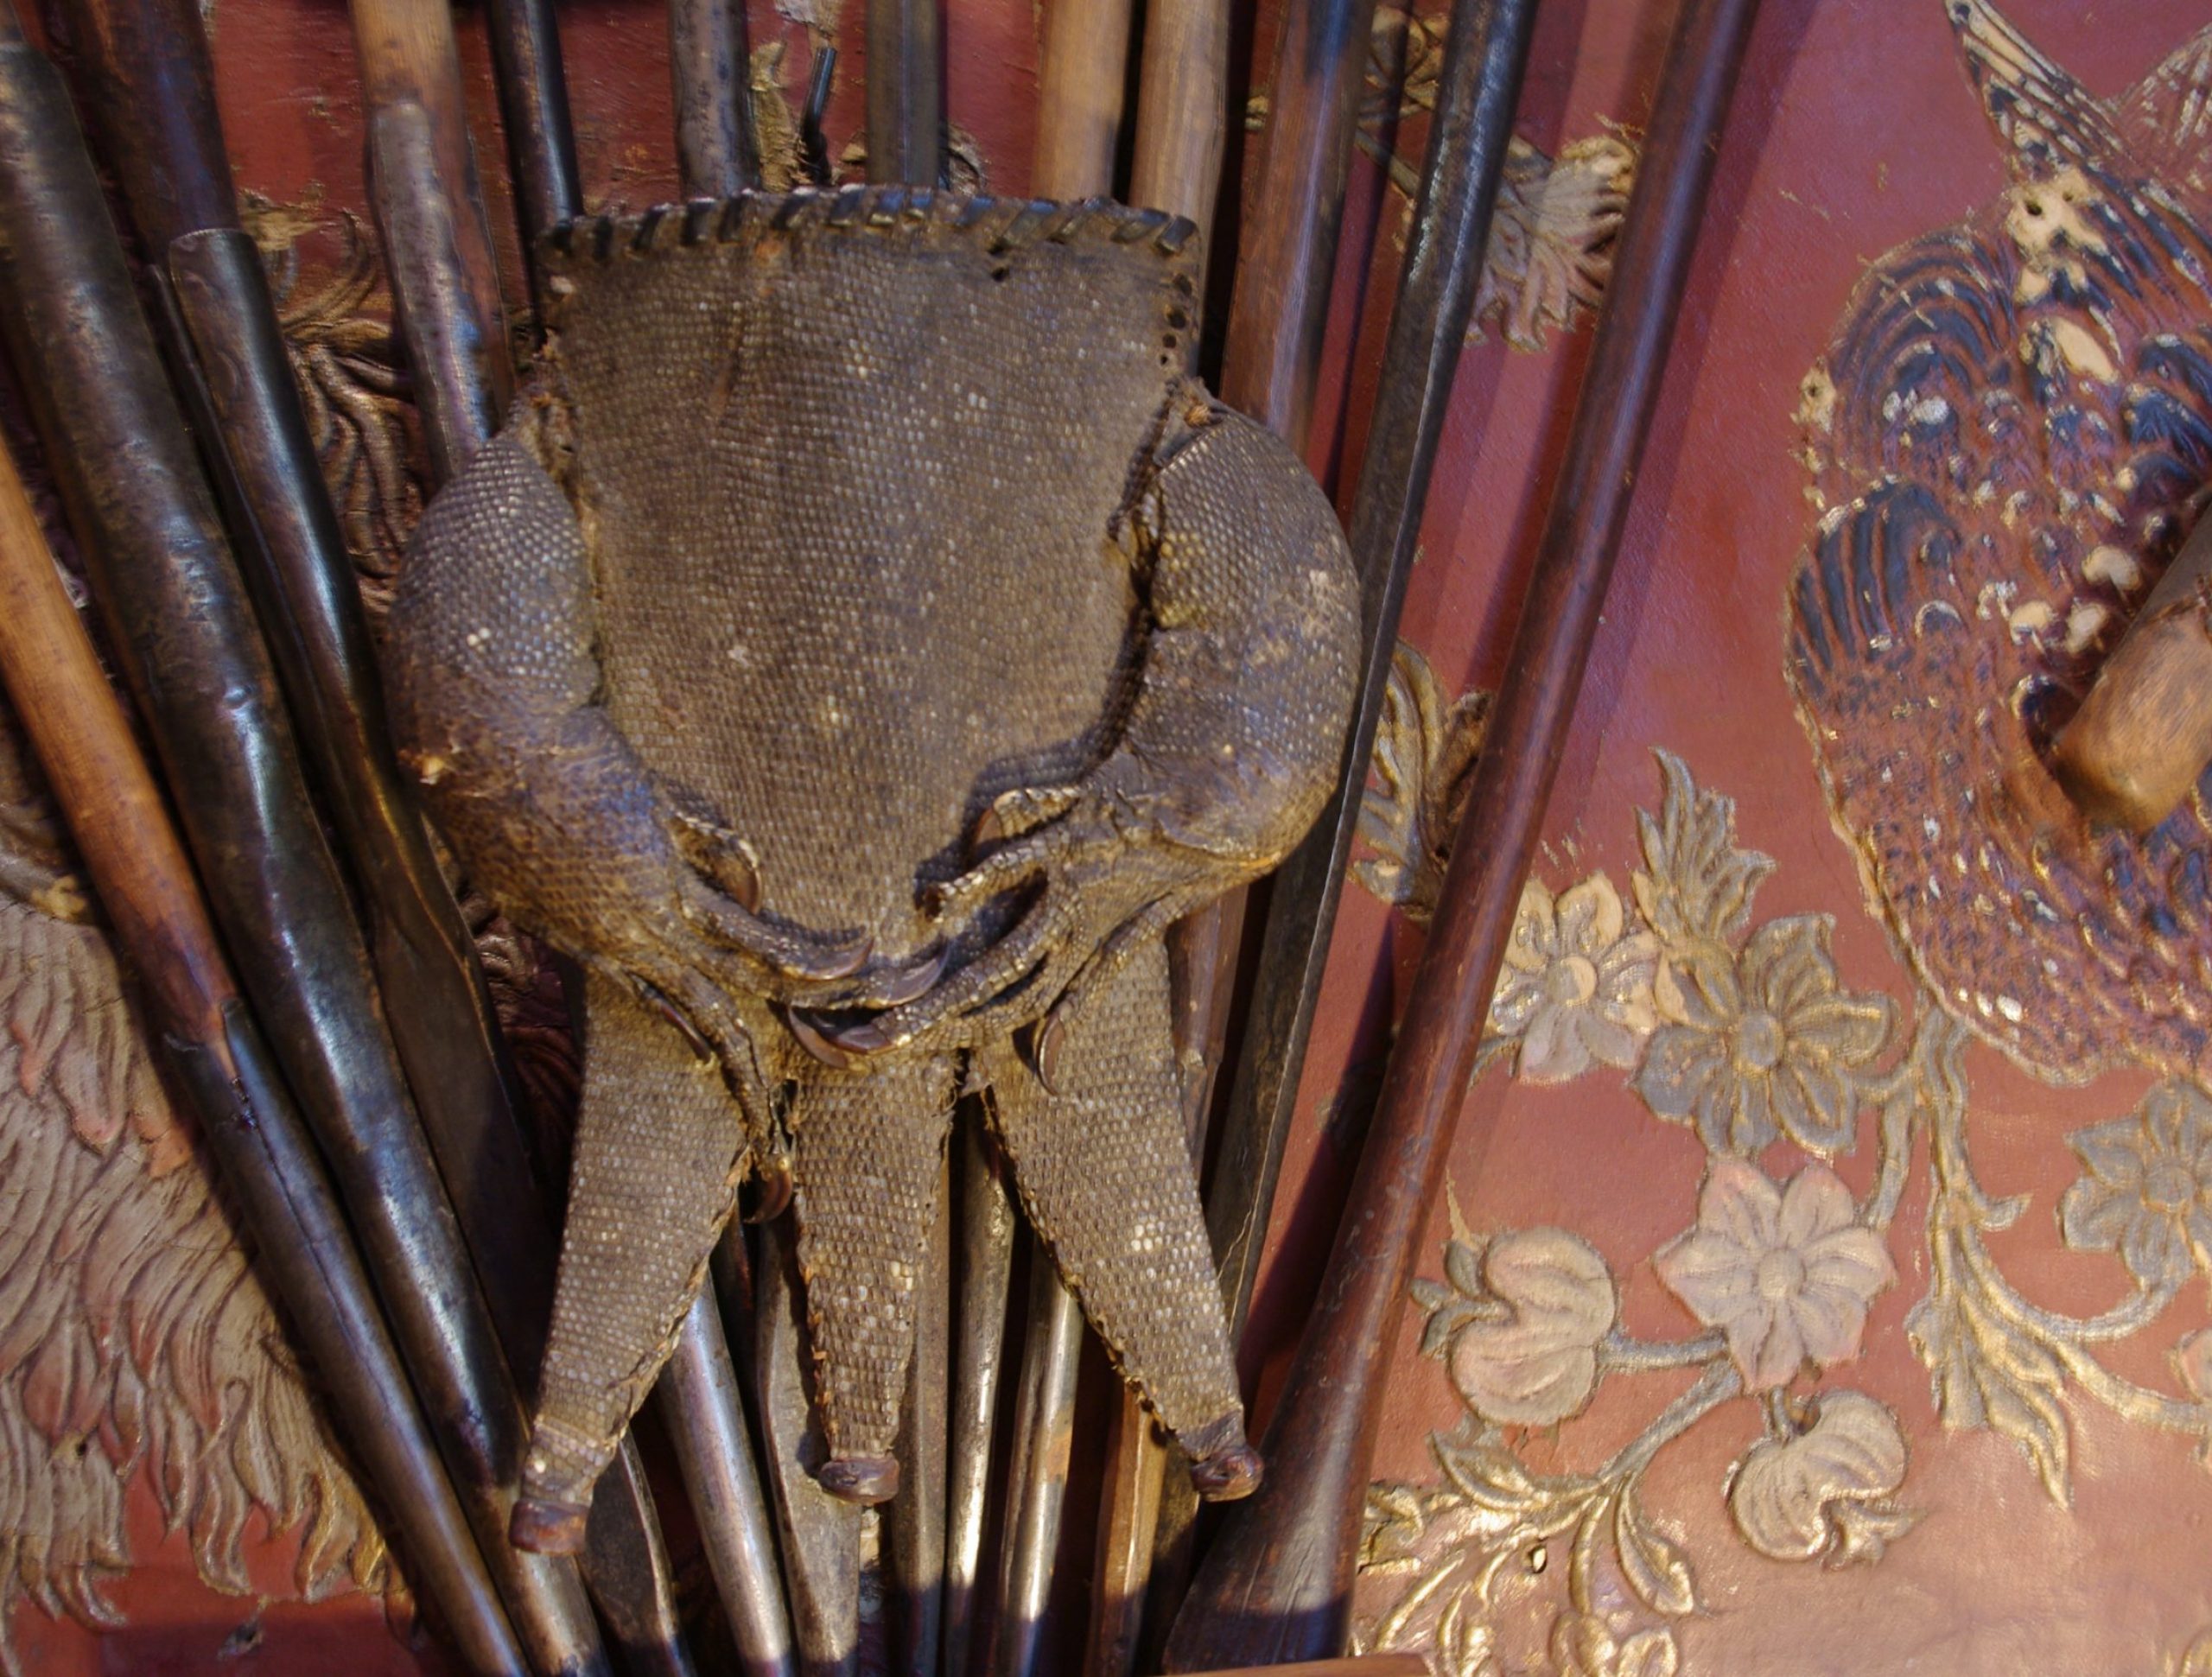 Monitor lizard knife-holder, and detail, (c. 1900).  Photographed in situ, Eldon House. Photo by S. Butlin.